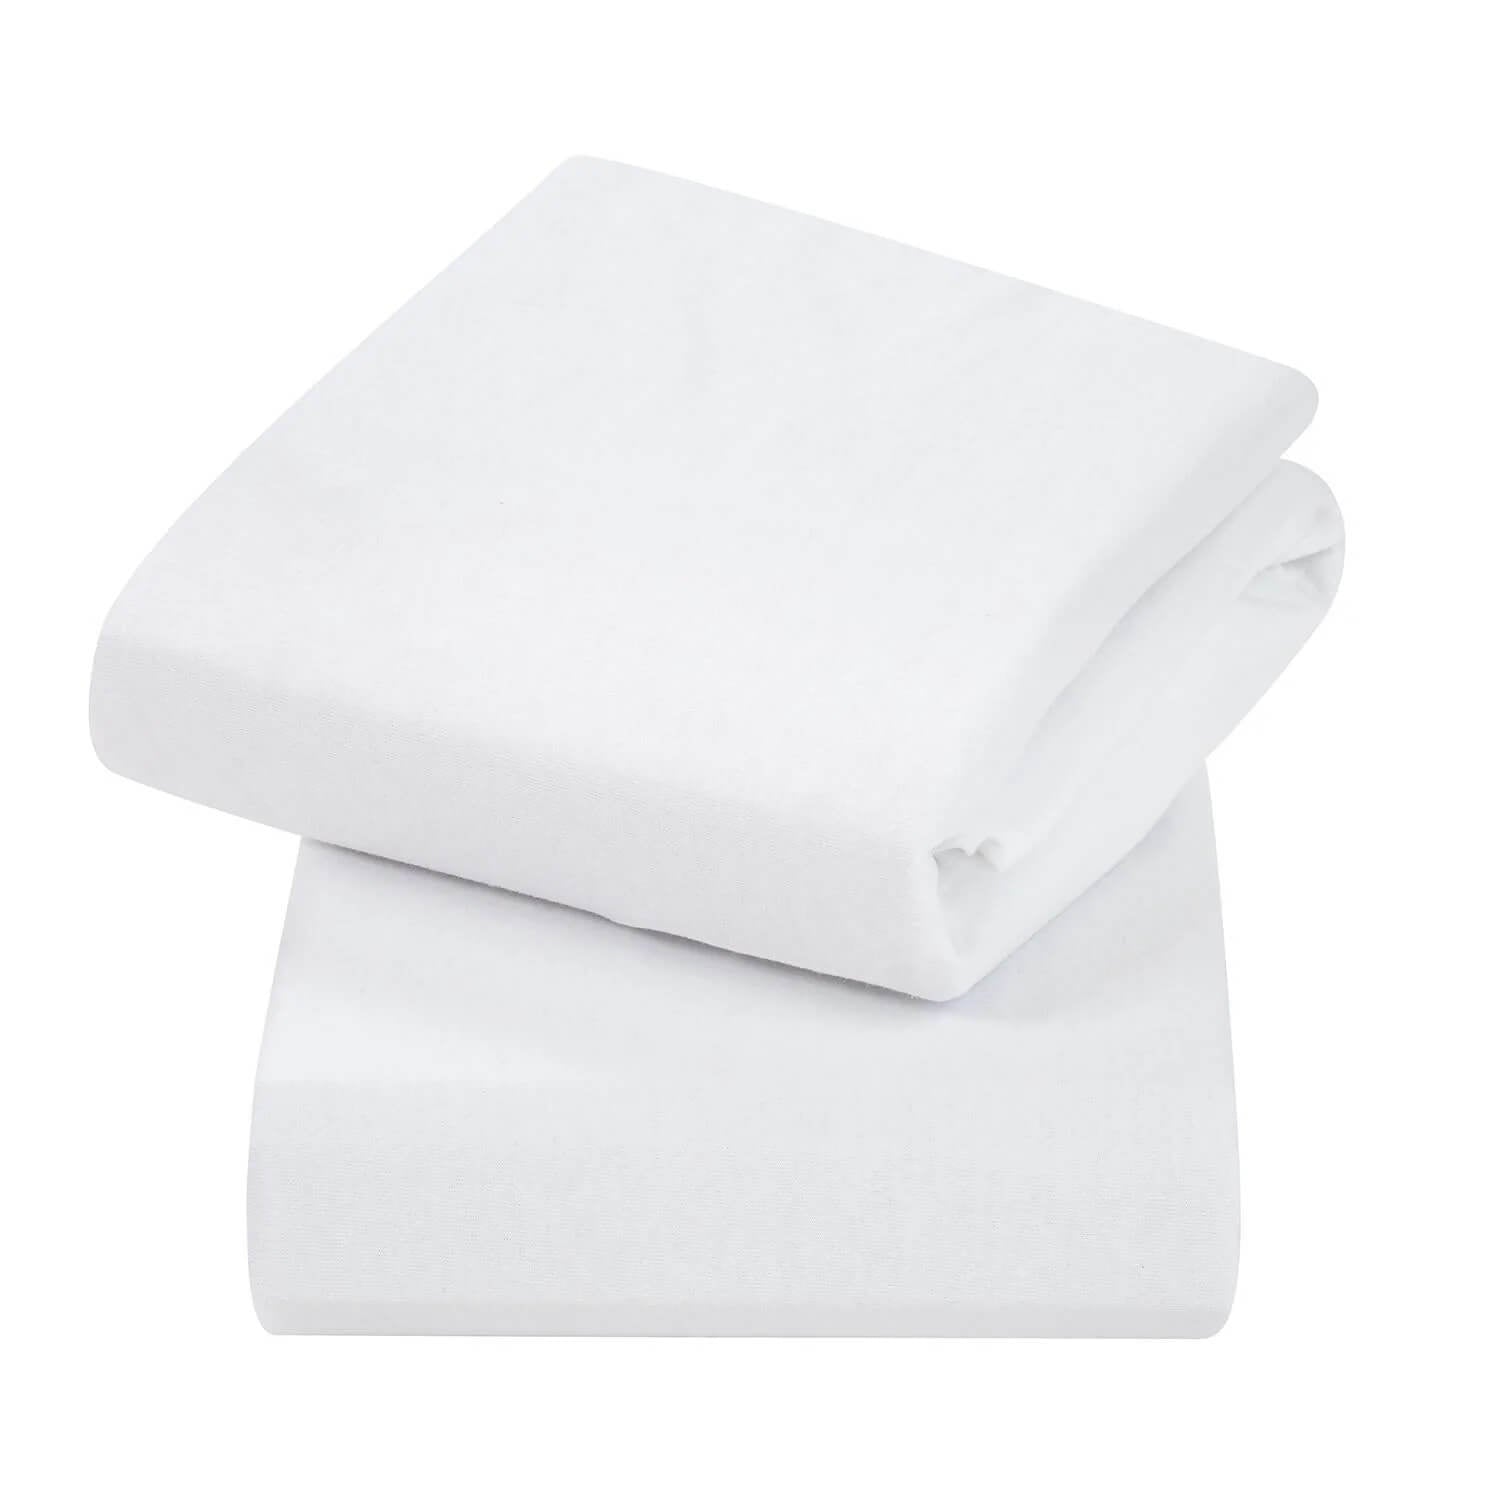 Super soft 100% jersey cotton sheets. Deep Elastic skirts: with 360 elastic flap for secure fitting. 2 pack of fitted sheets for cot in white.